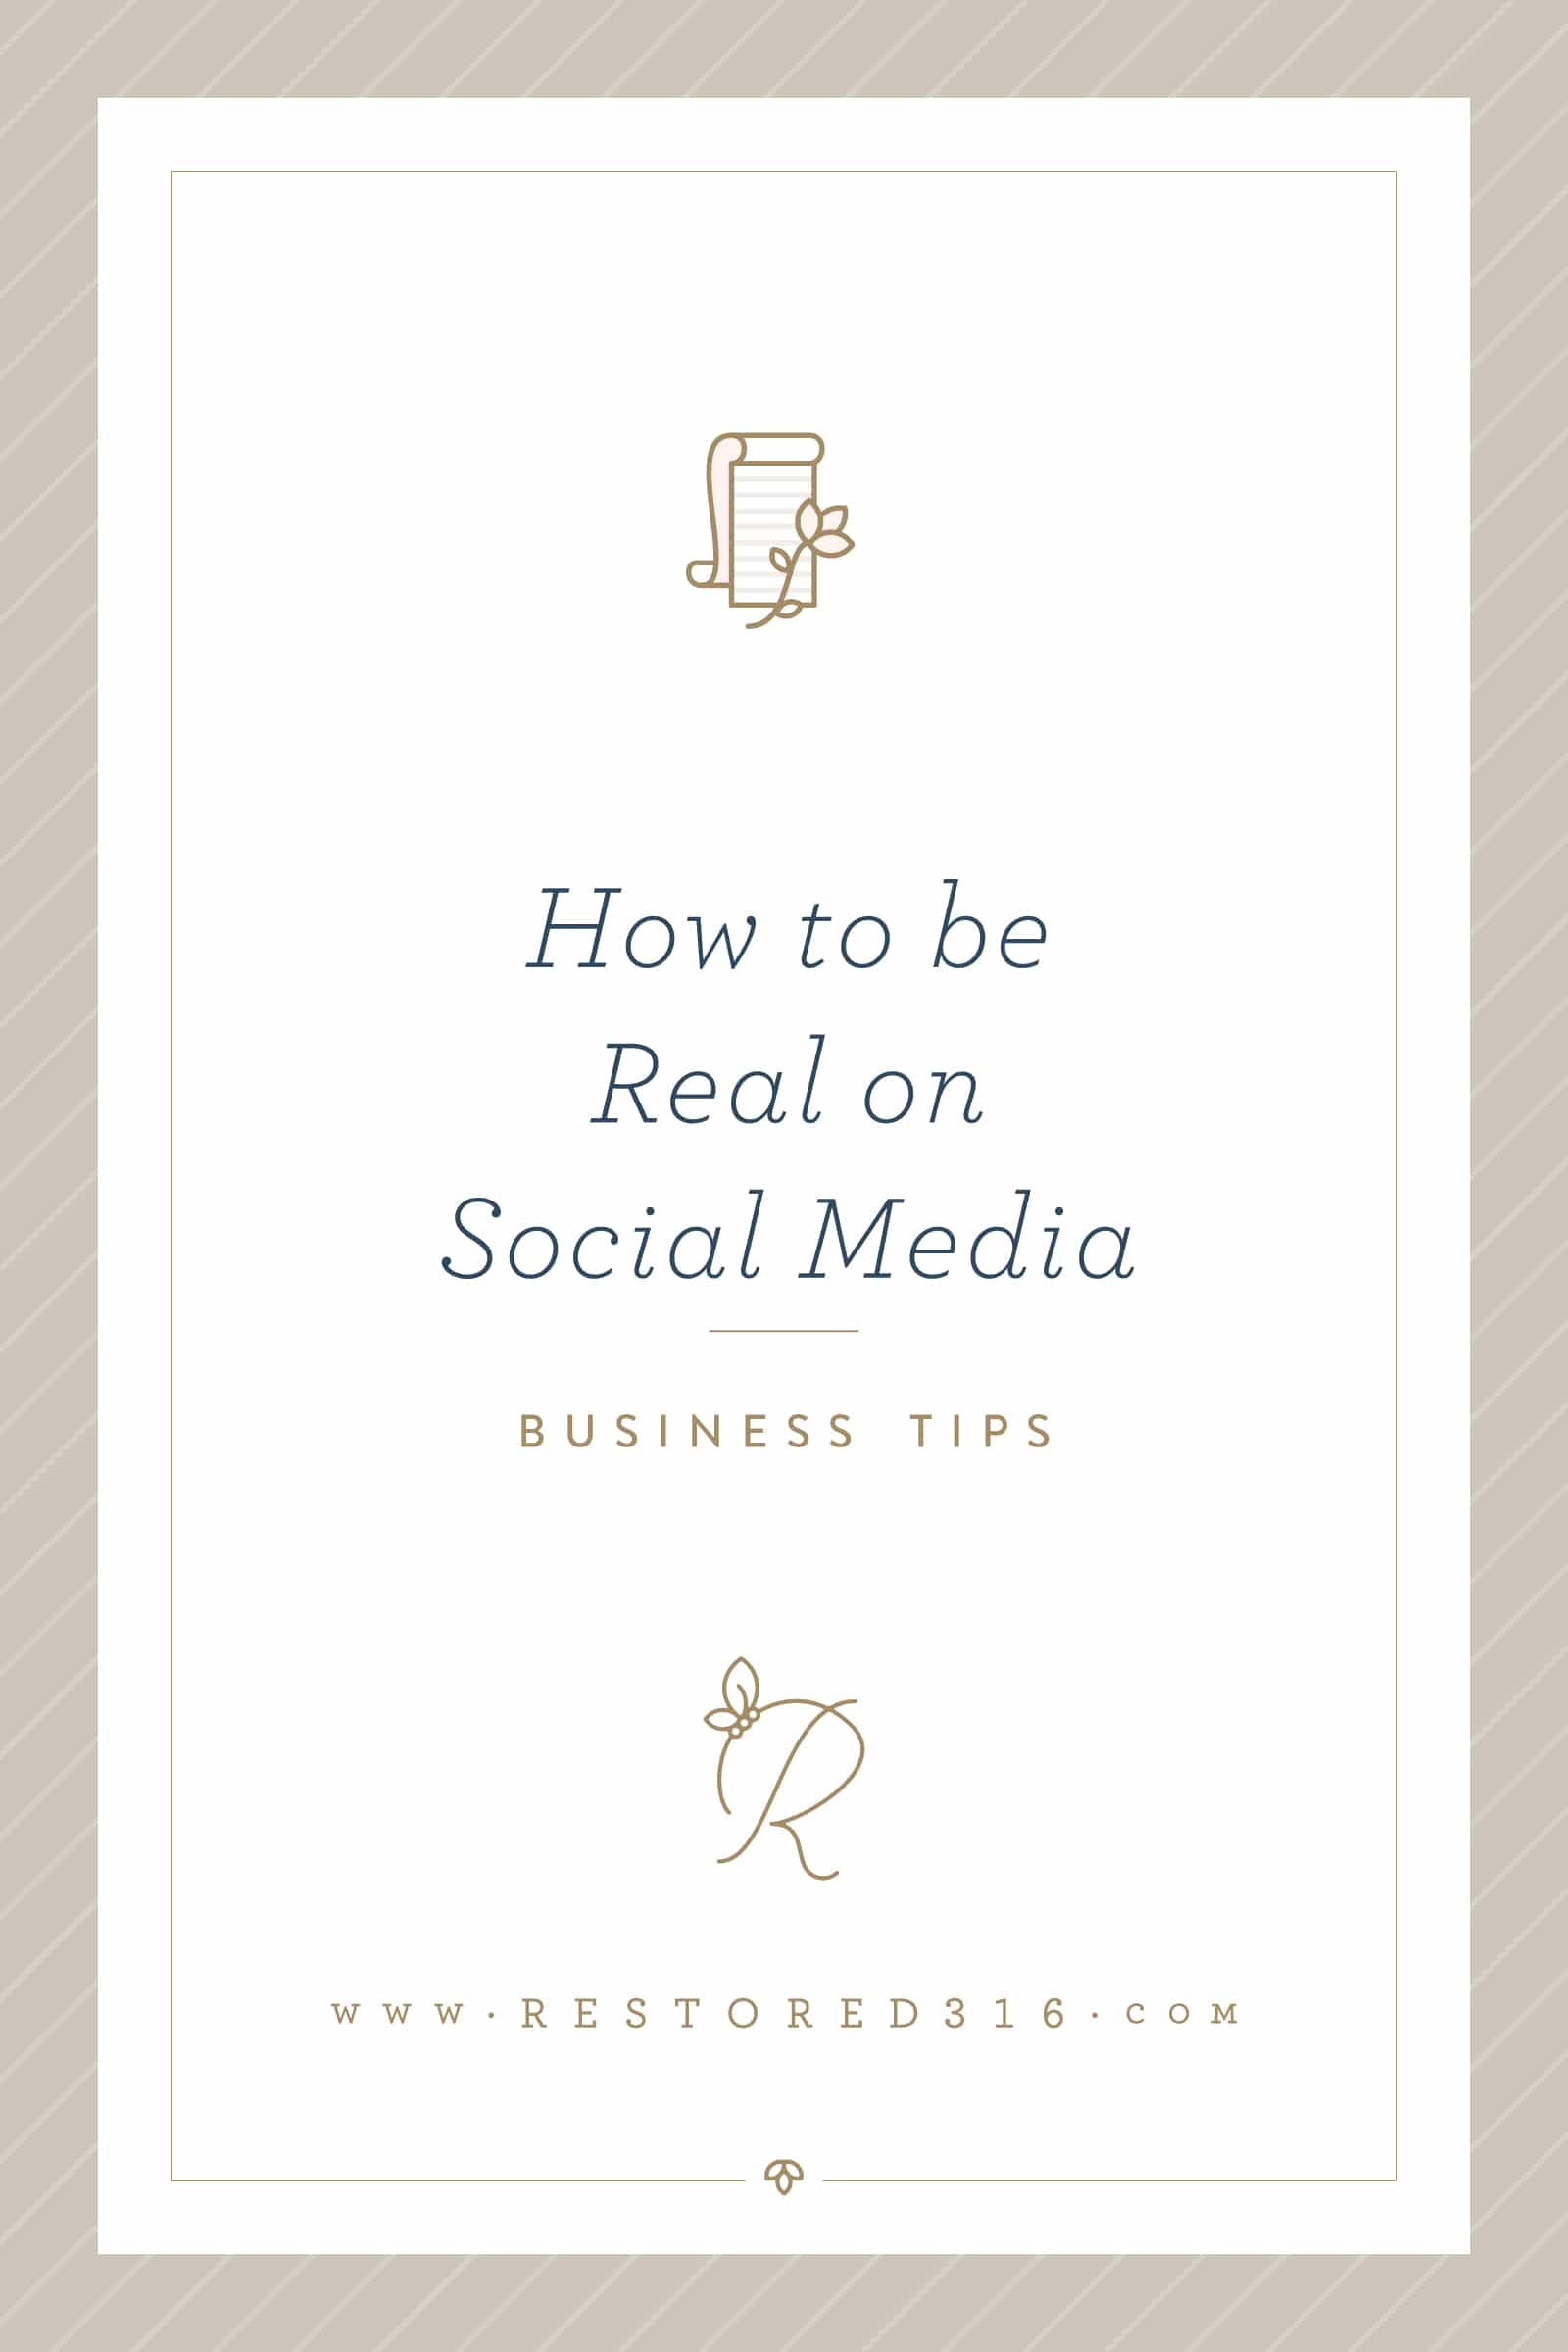 How to Be Real on Social Media